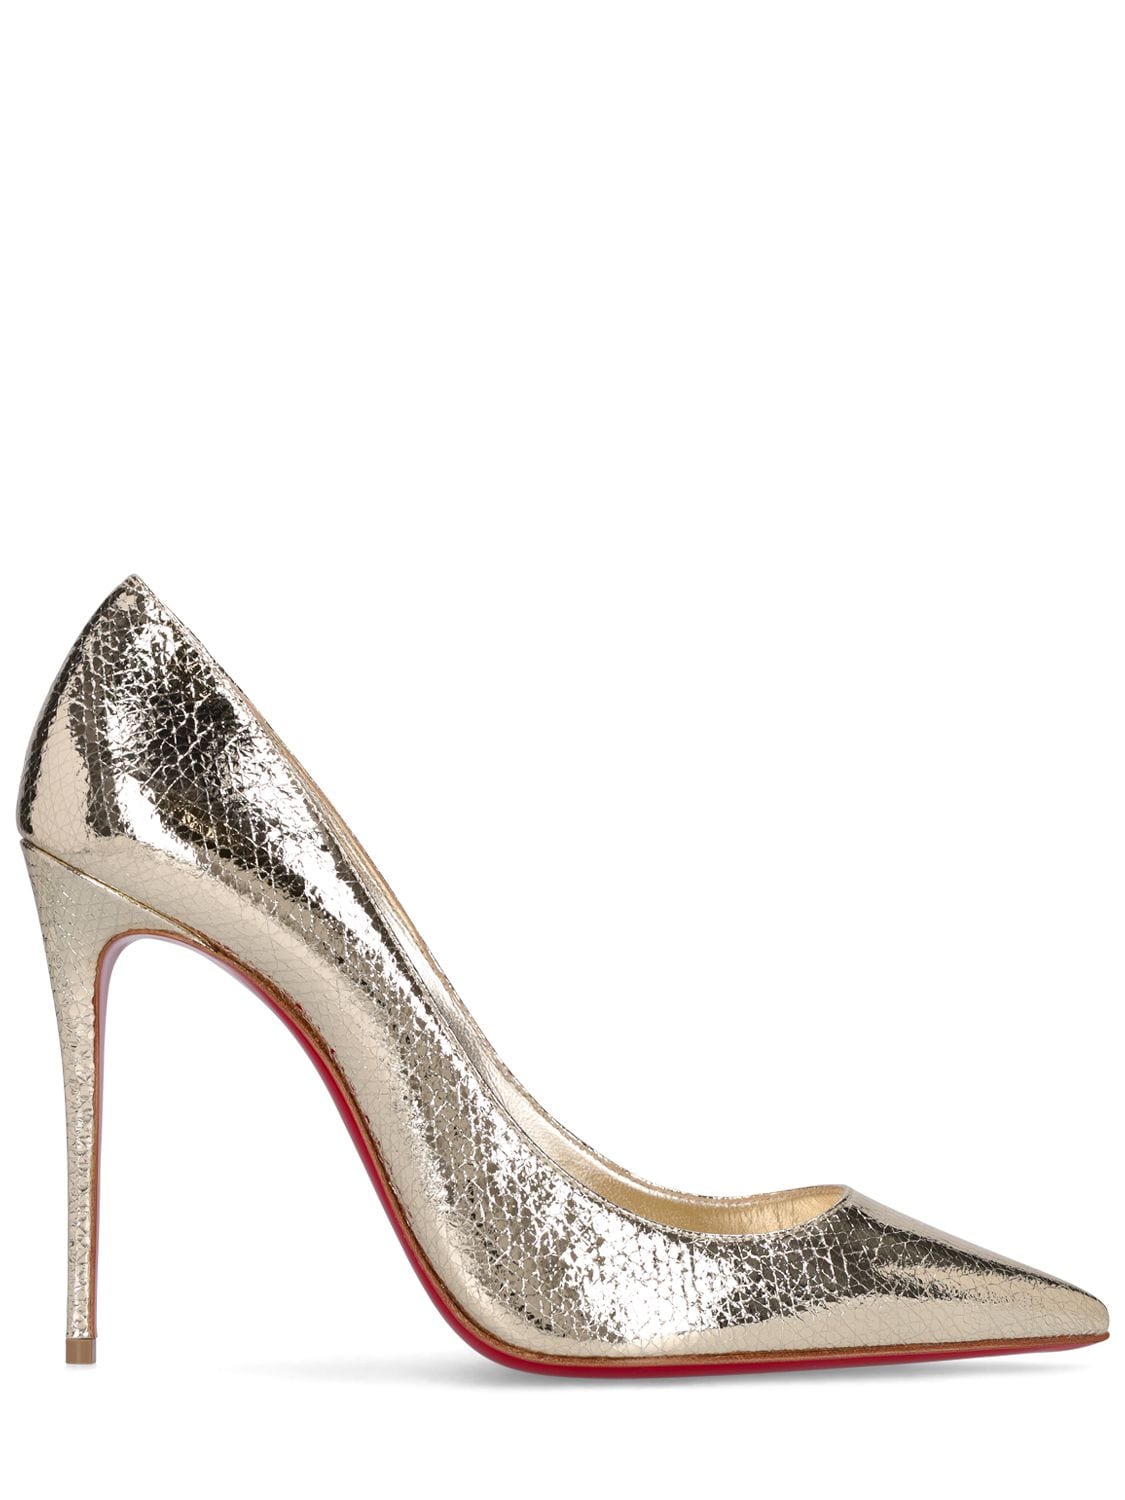 CHRISTIAN LOUBOUTIN 100mm Kate Laminated Leather Pumps